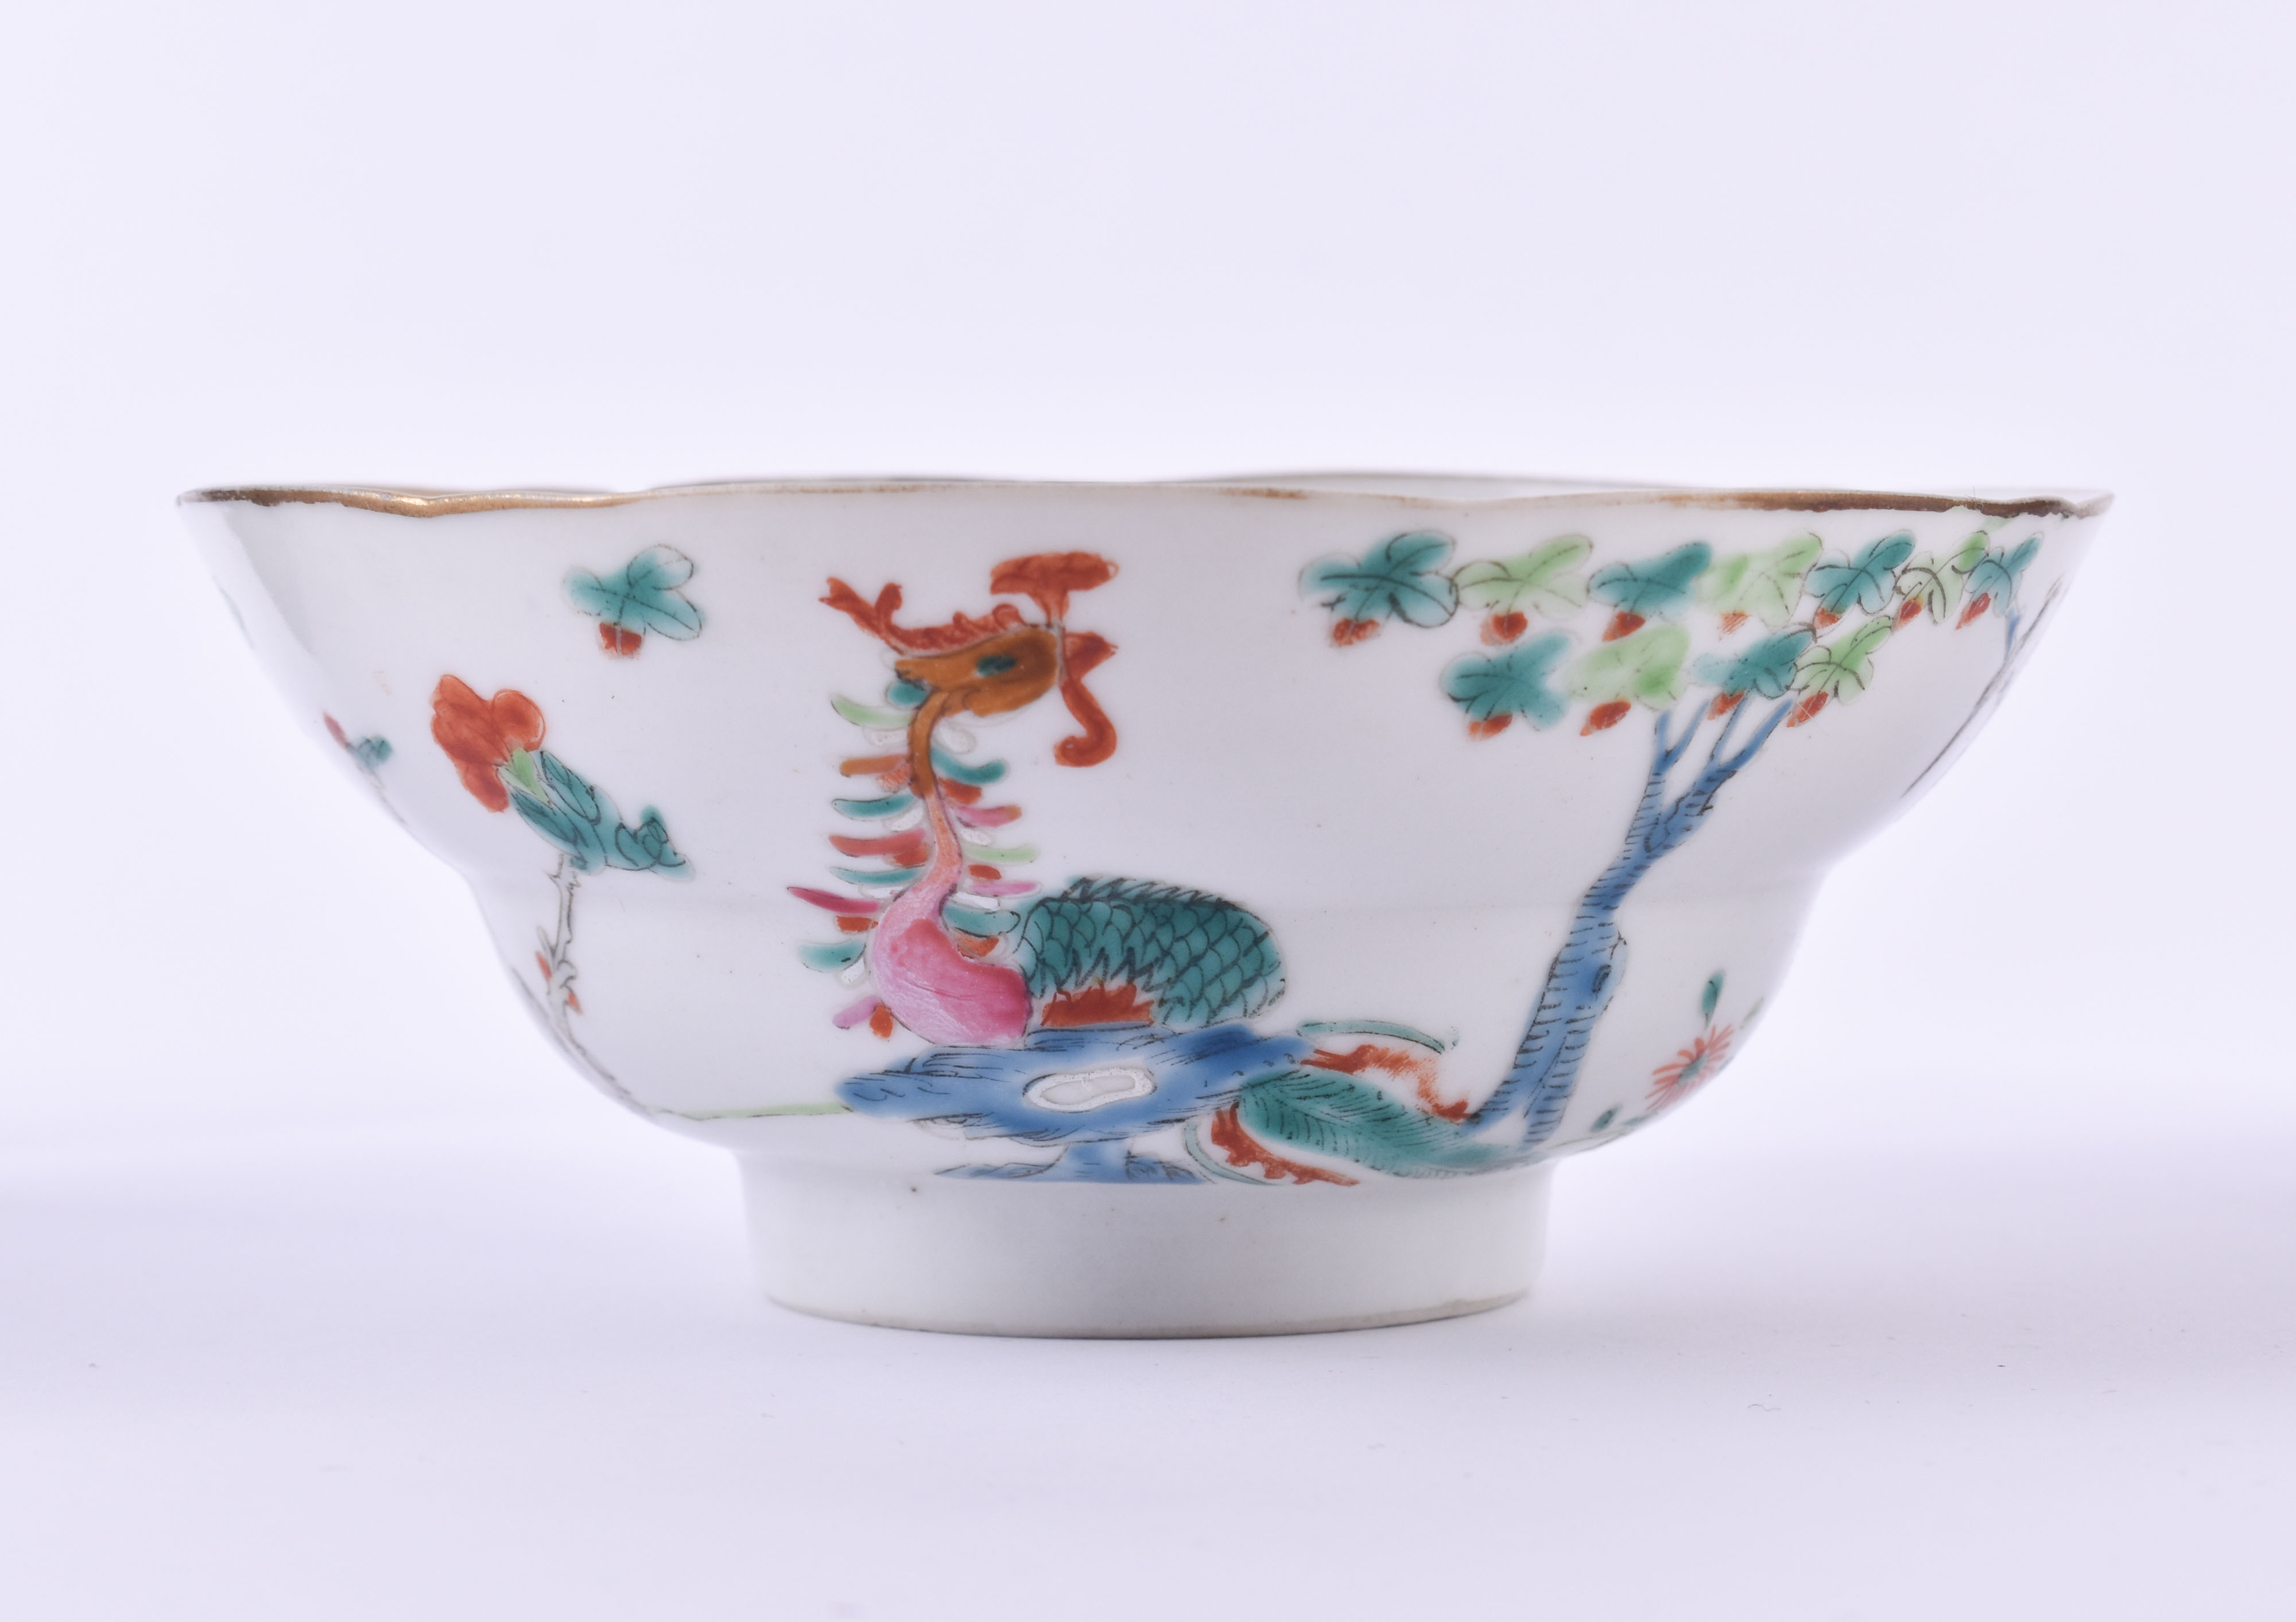  A group of Asian porcelain China Qing dynasty - Image 8 of 12